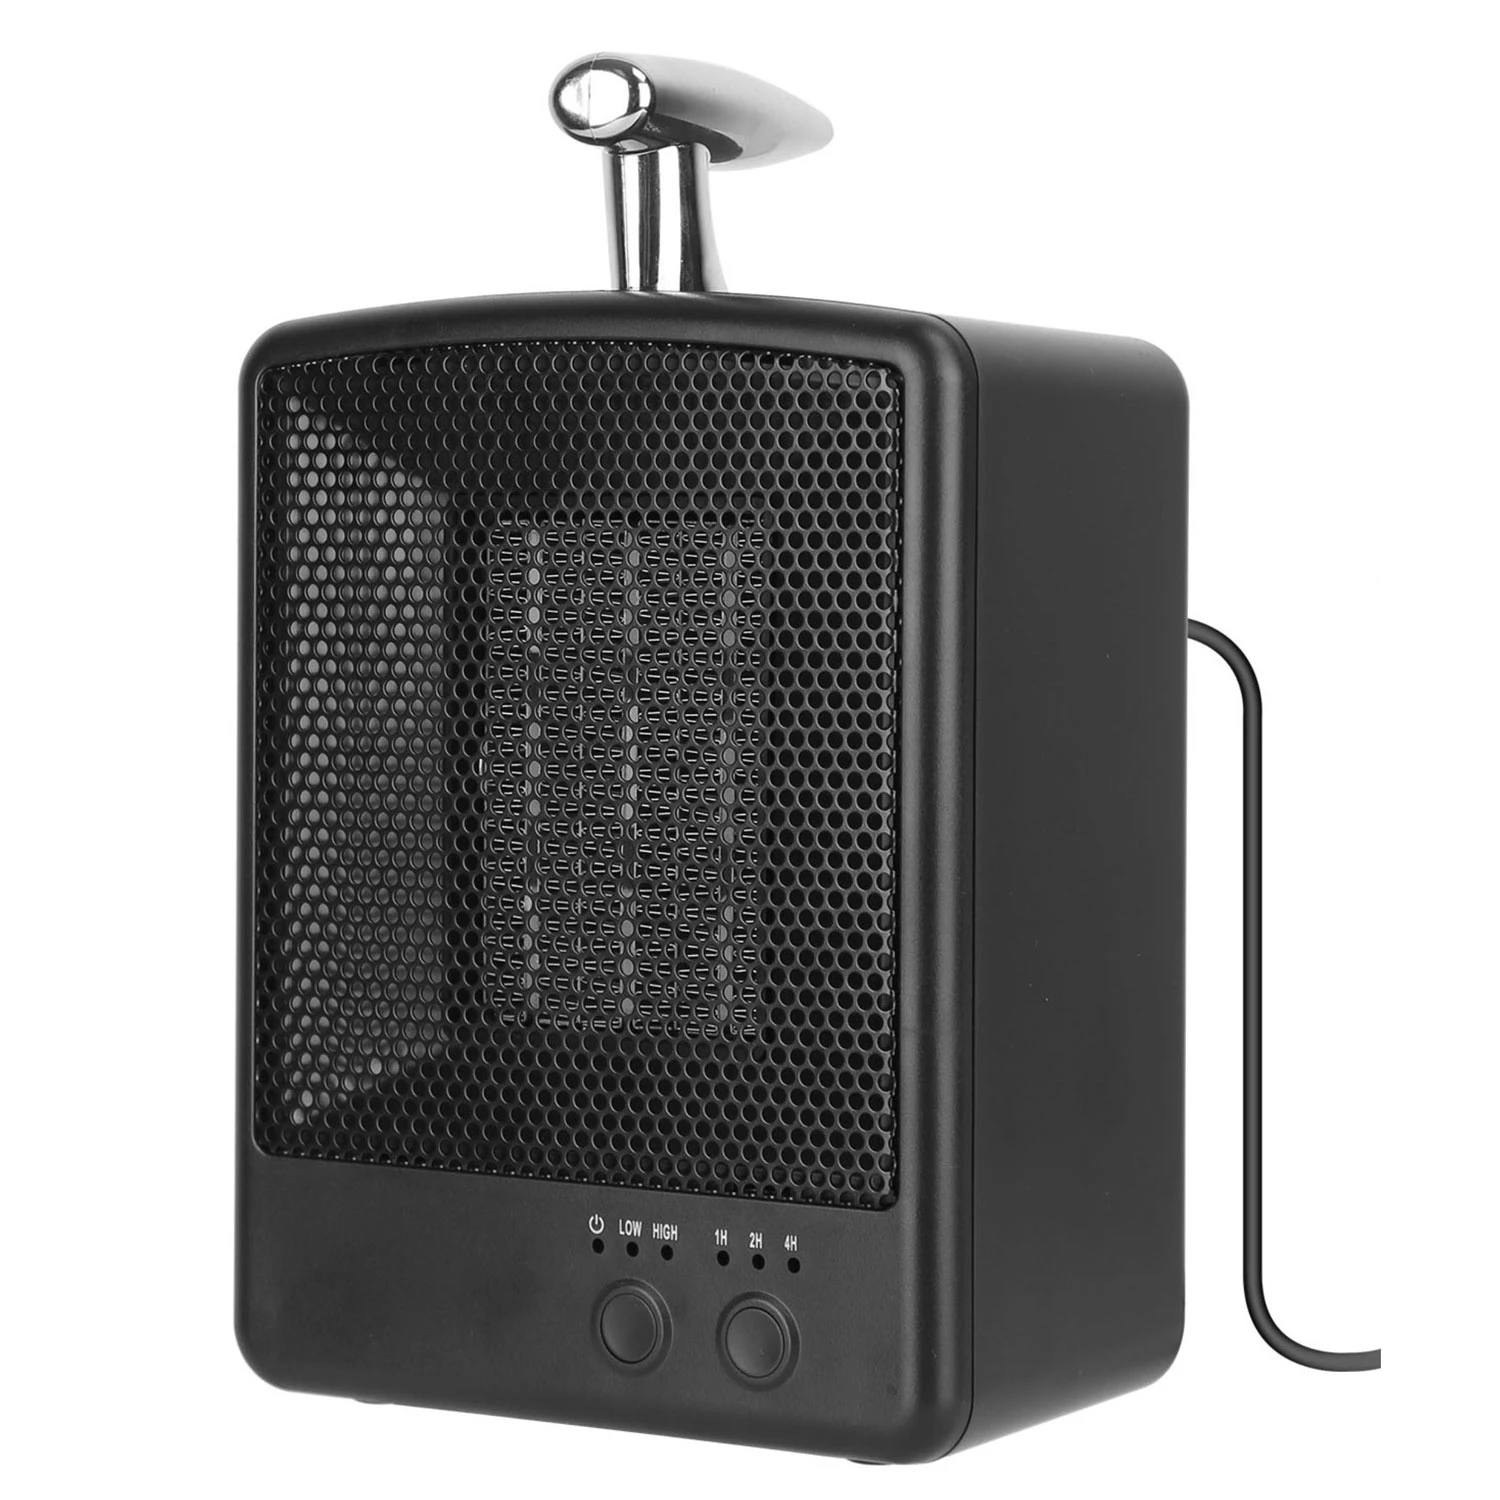 Portable Electric Space Heater - 1000W, Tip Over Protection, Adjustable Temperature, Timer - Bedroom